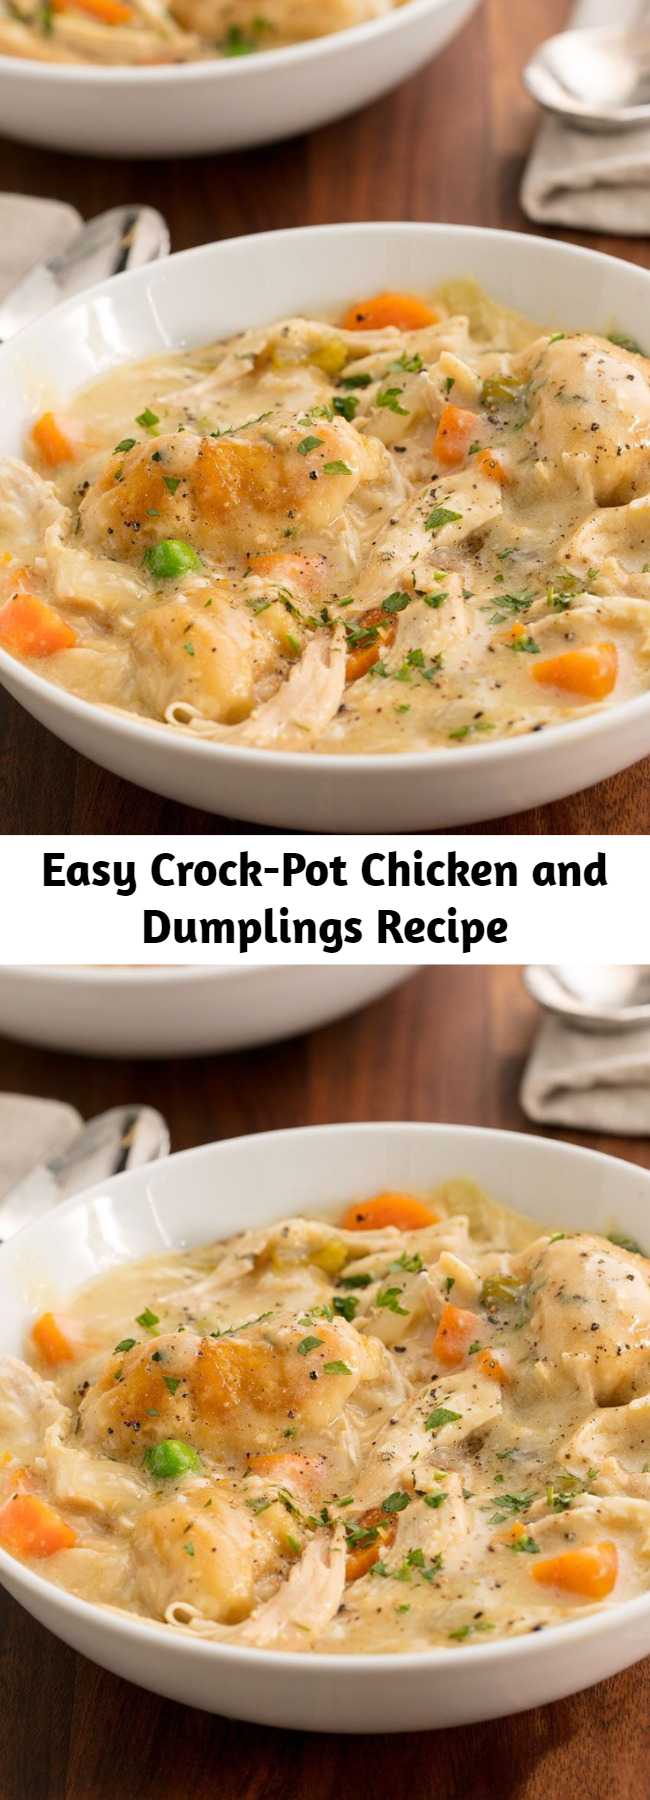 Easy Crock-Pot Chicken and Dumplings Recipe - Is there anything more comforting than chicken & dumplings? Nope! #easy #recipe #crockpot #slowcooker #chicken #dumplings #comfortfood #homemade #withbiscuits #instantpot #southern